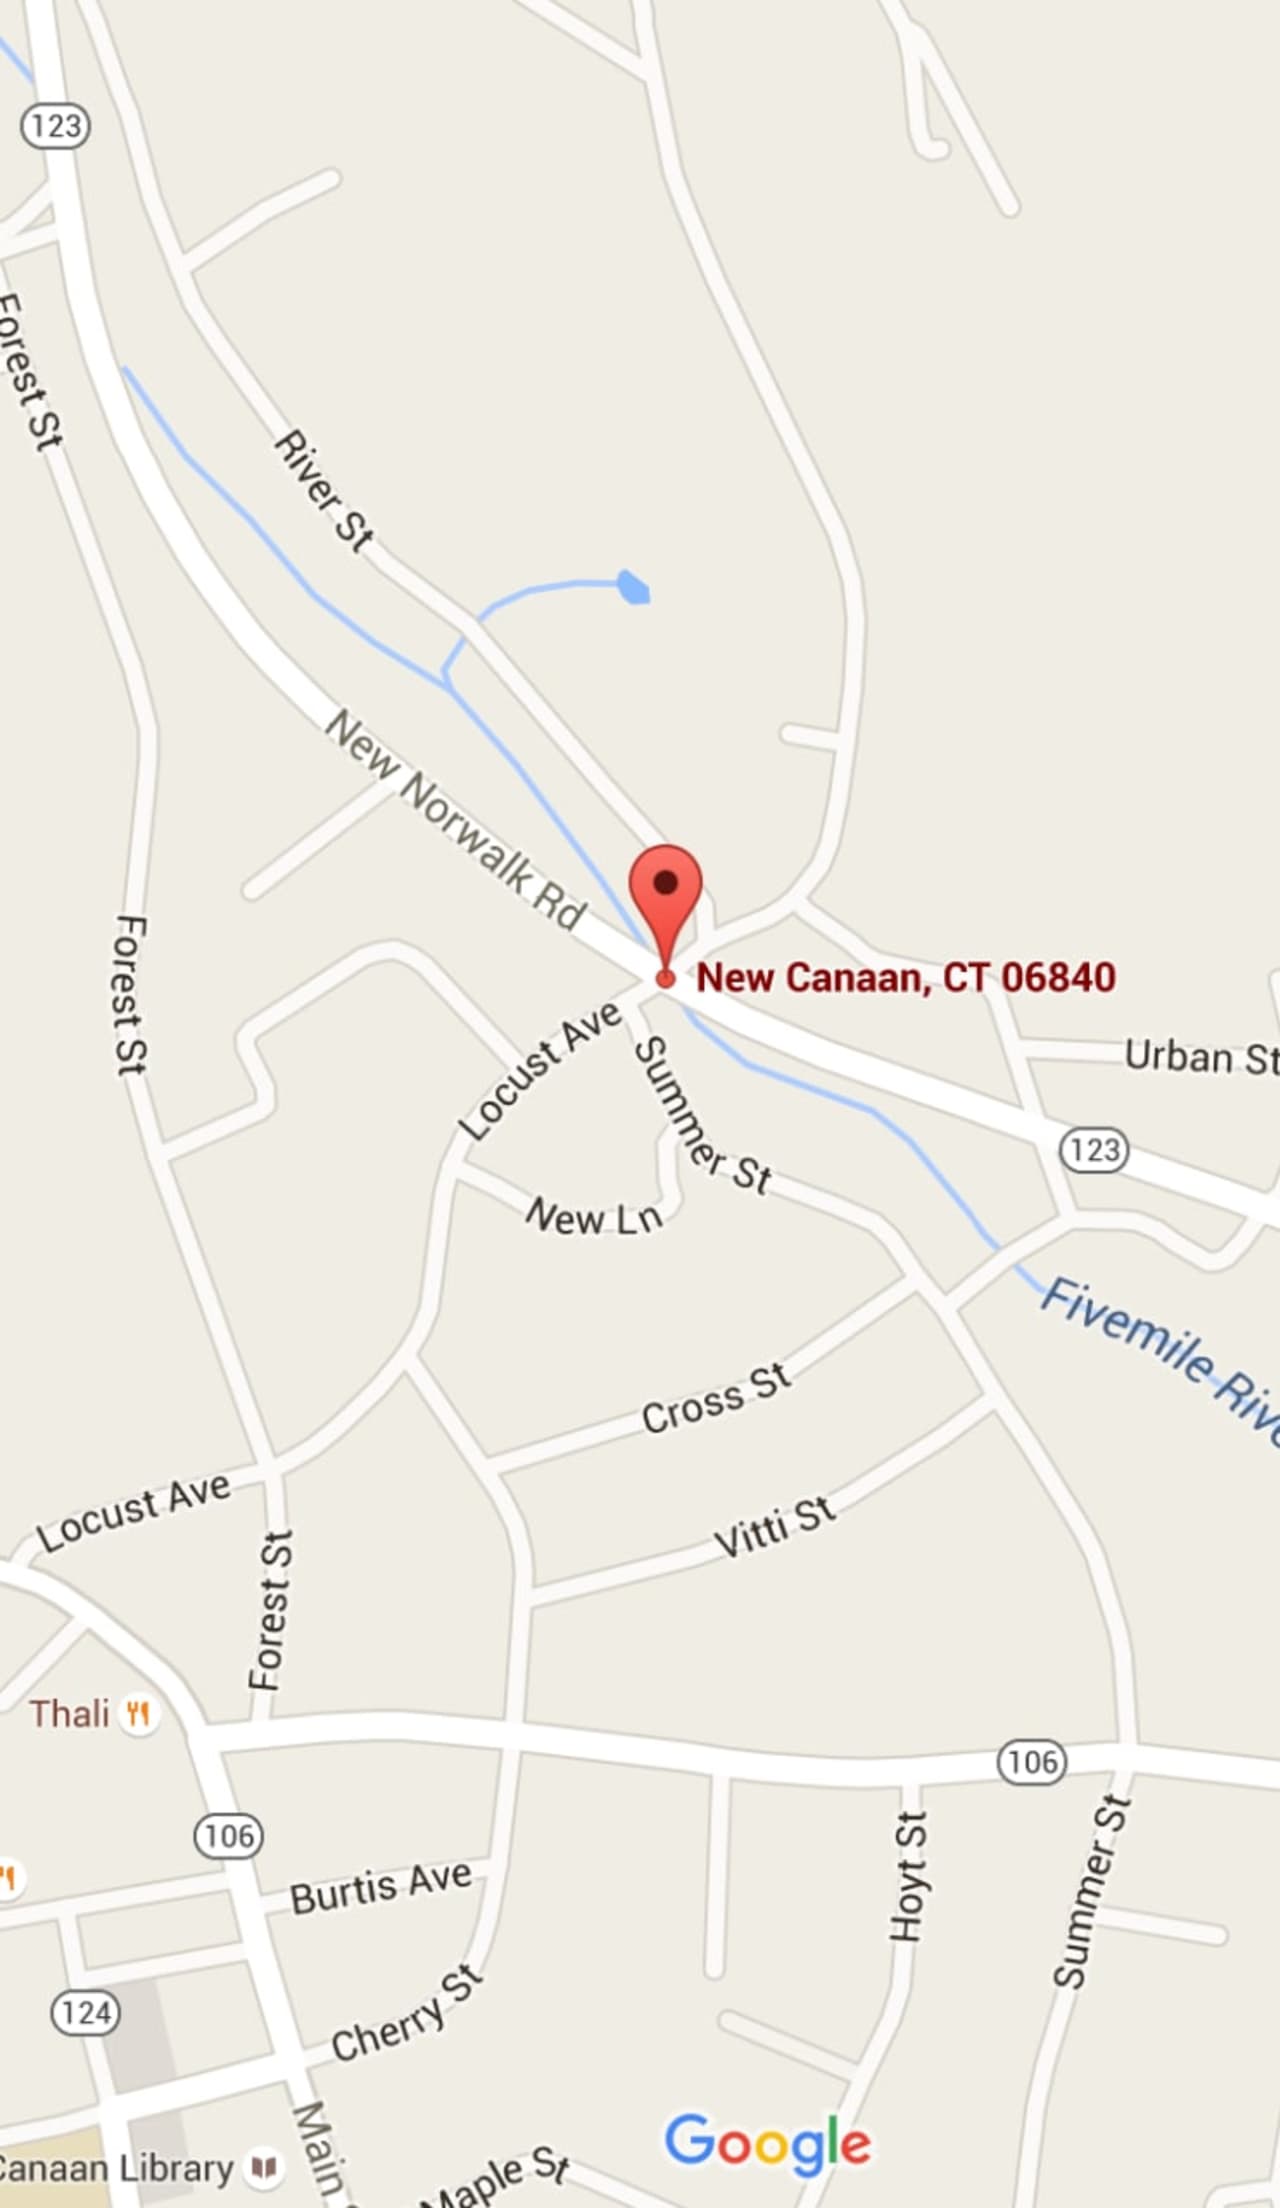 The accident happened at 2:19 a.m. Sunday at New Norwalk Road and Locust Avenue in New Canaan.